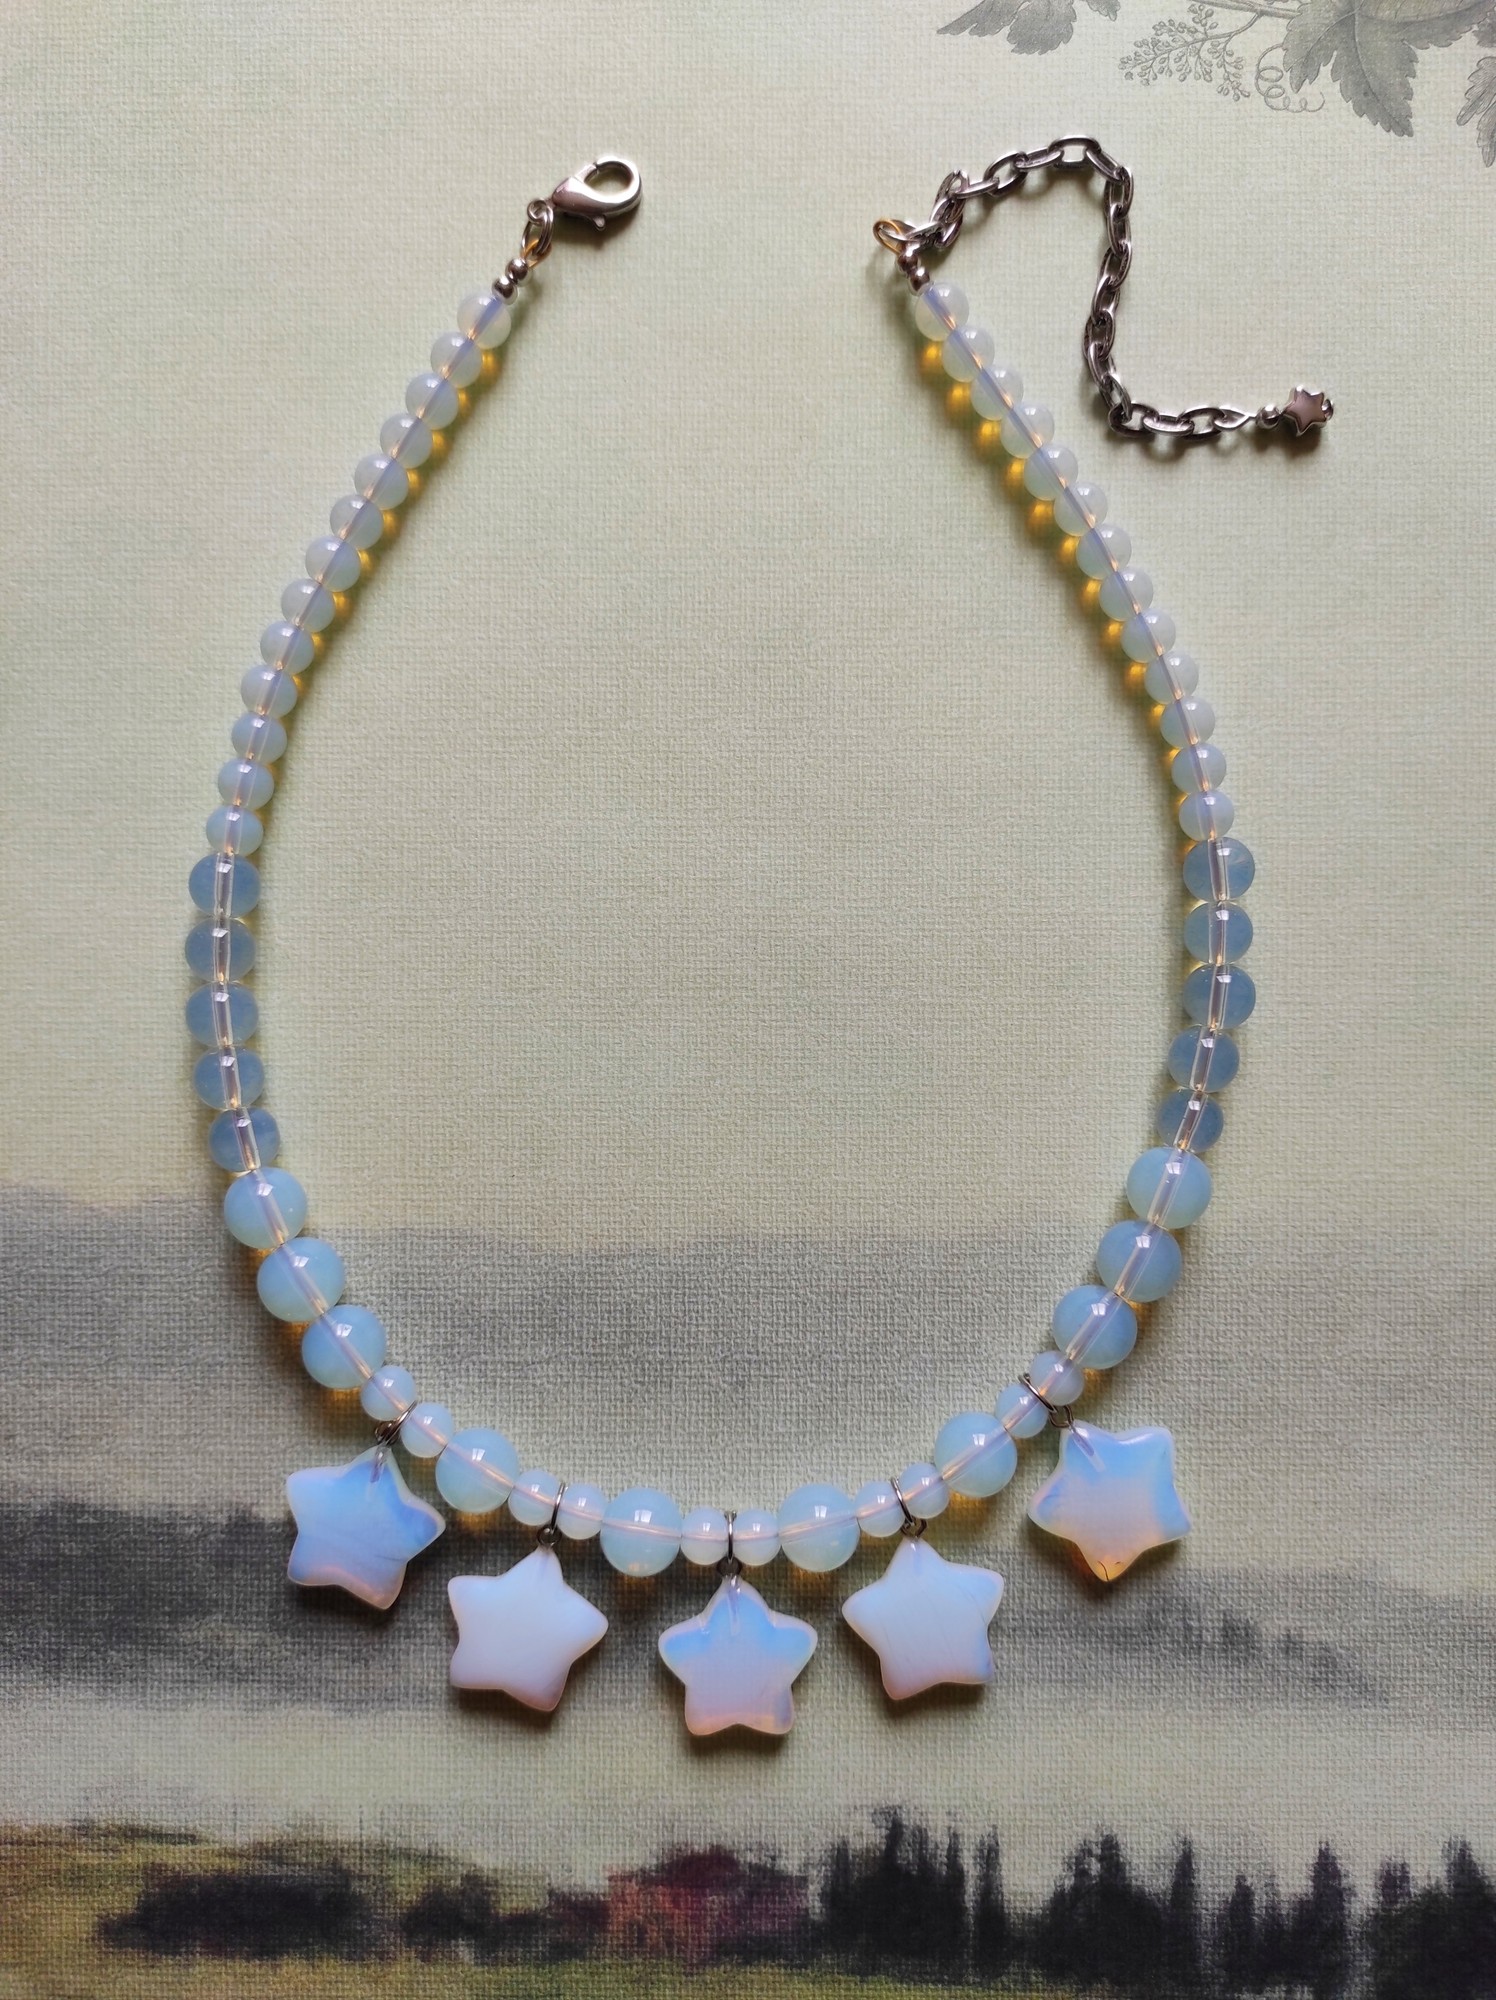 Necklace "Opalite stars" from opalite